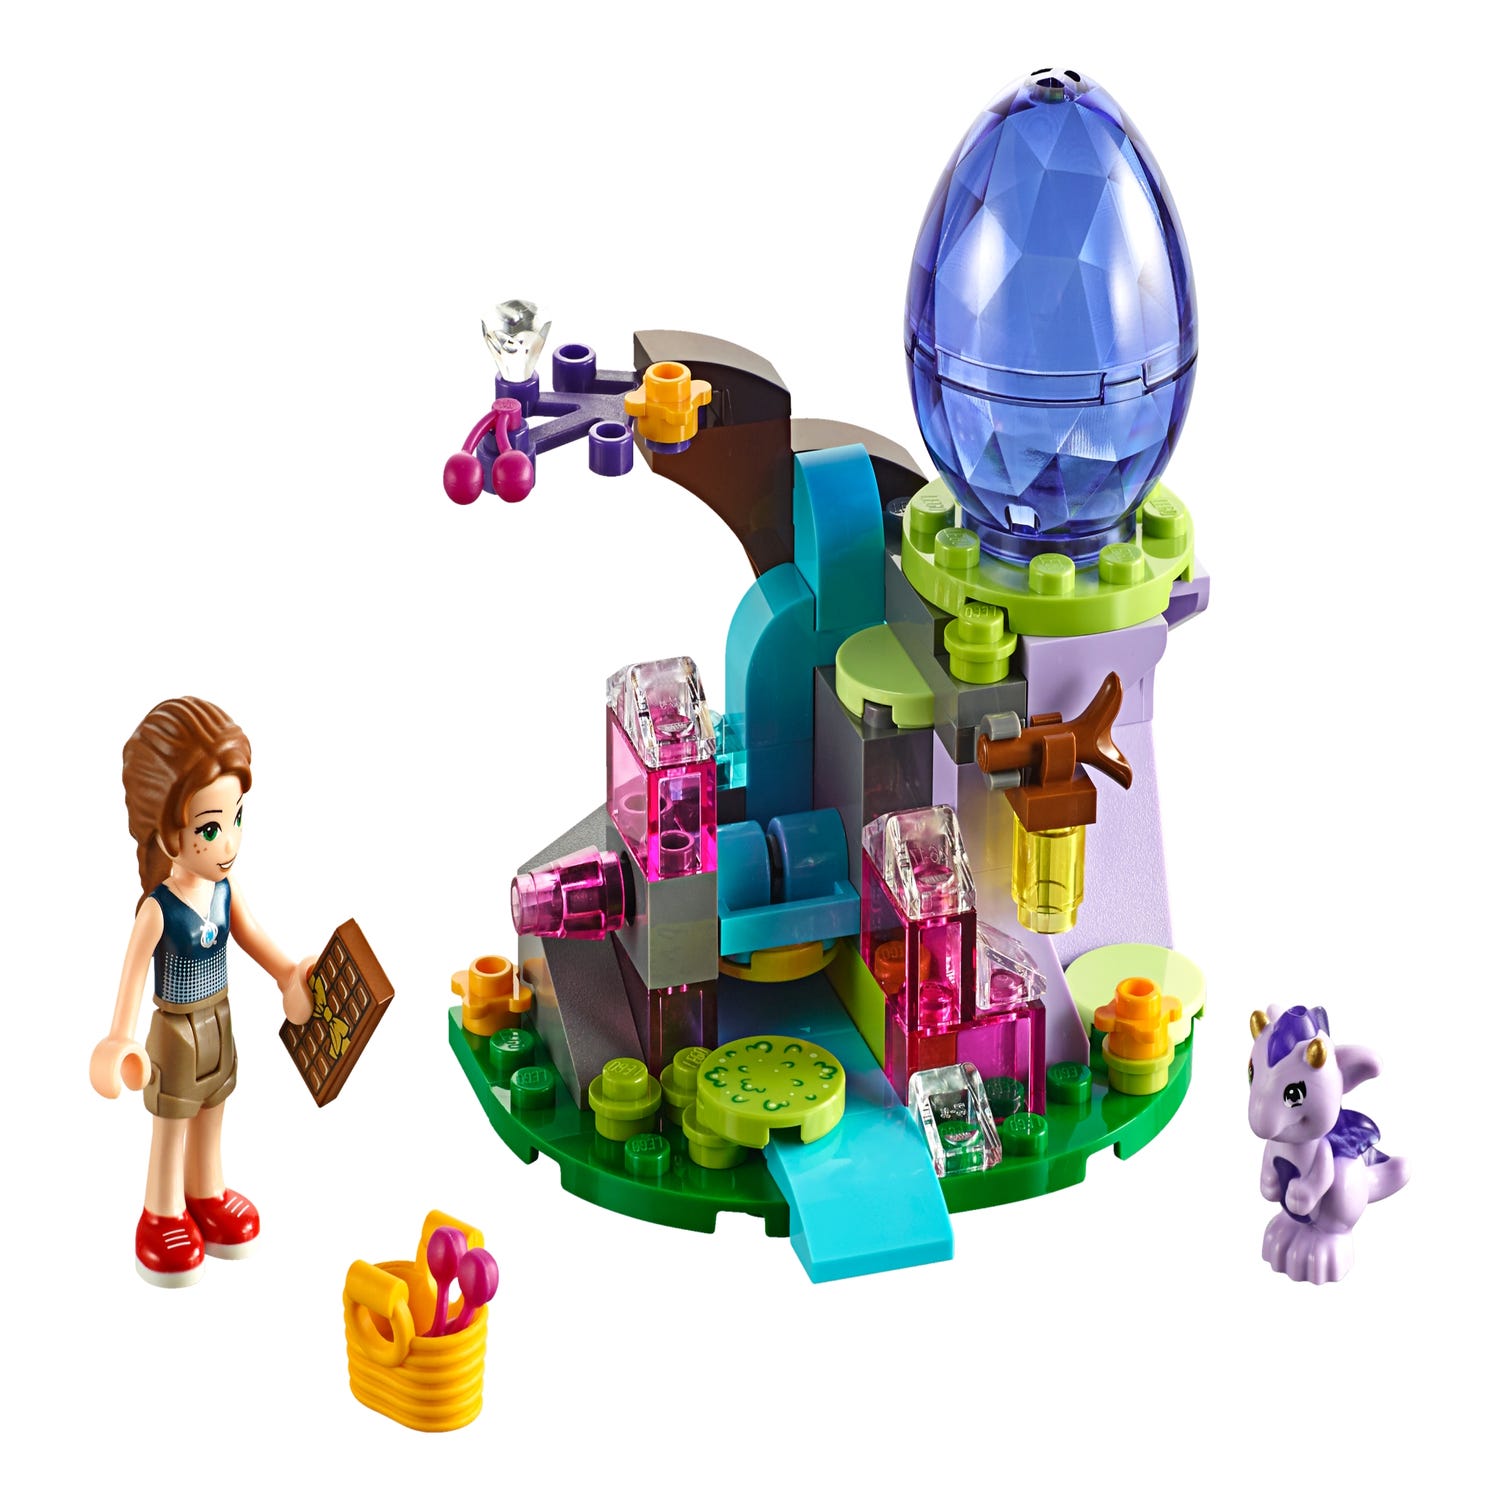 tale At bygge manuskript Emily Jones & the Baby Wind Dragon 41171 | Elves | Buy online at the  Official LEGO® Shop US